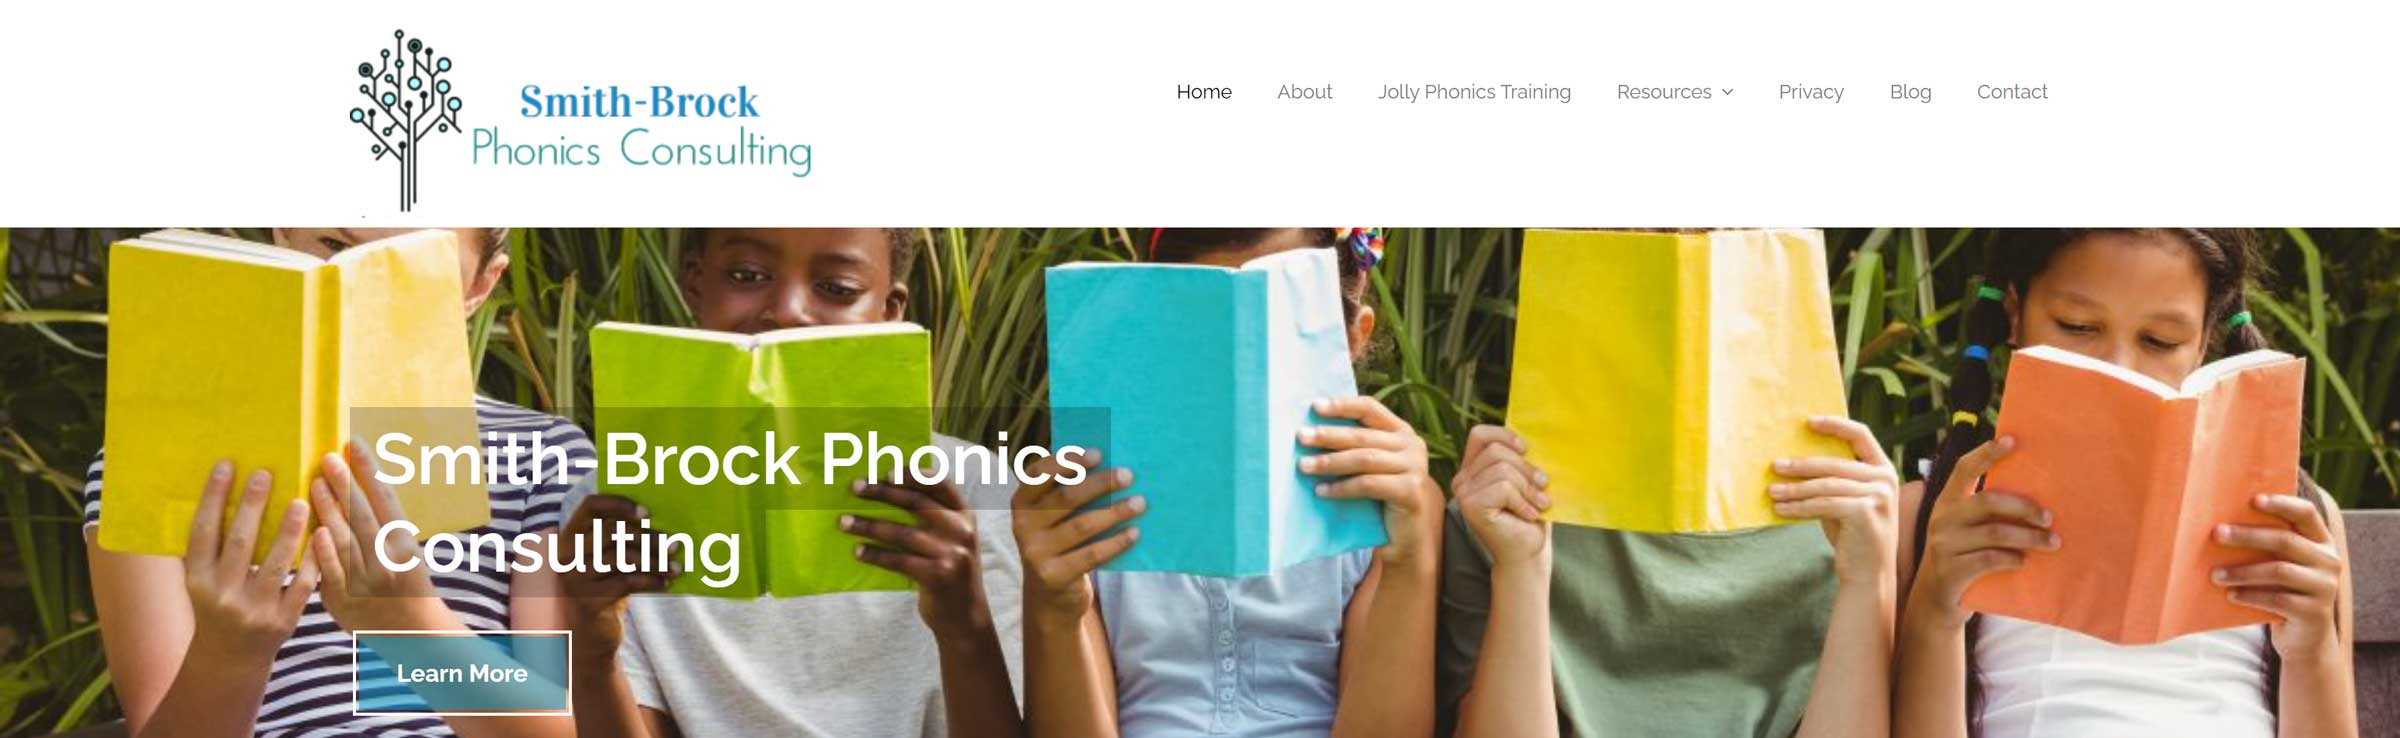 Smith-Brock Phonics Consulting banner